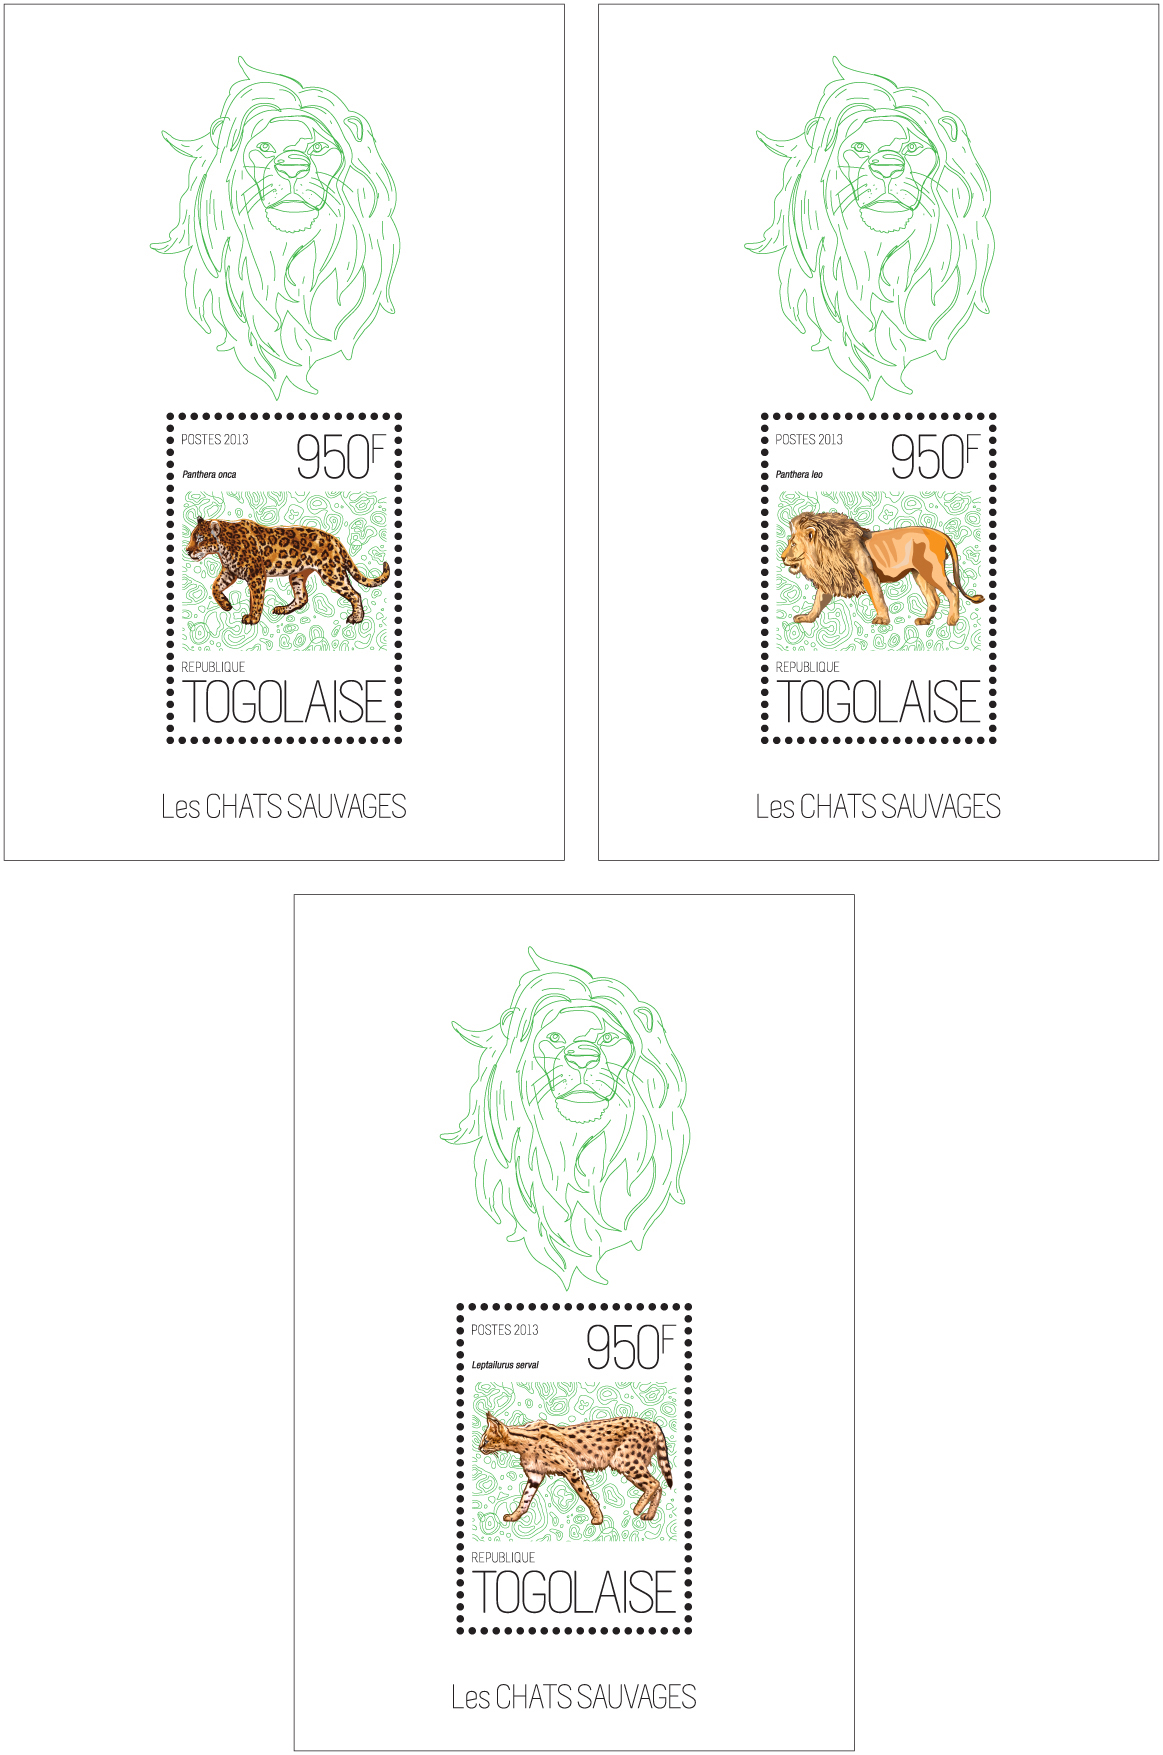 Wild cats - Issue of Togo postage stamps